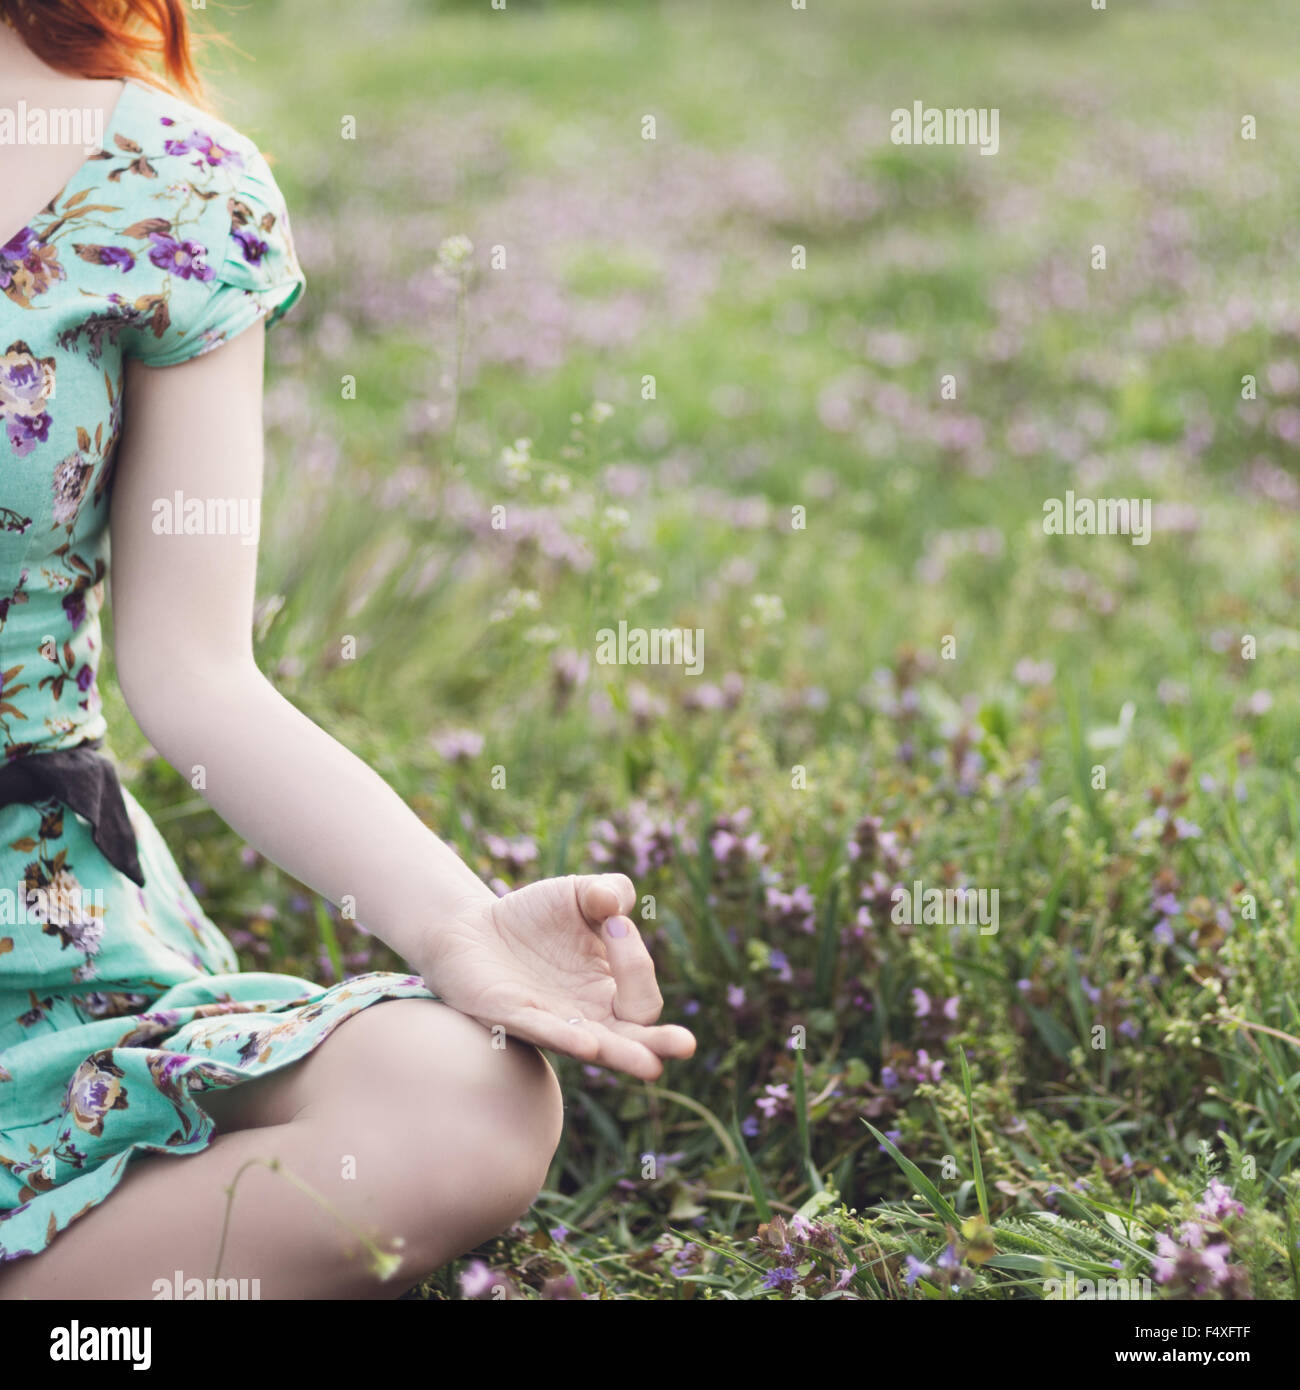 Young woman doing yoga in Park Banque D'Images